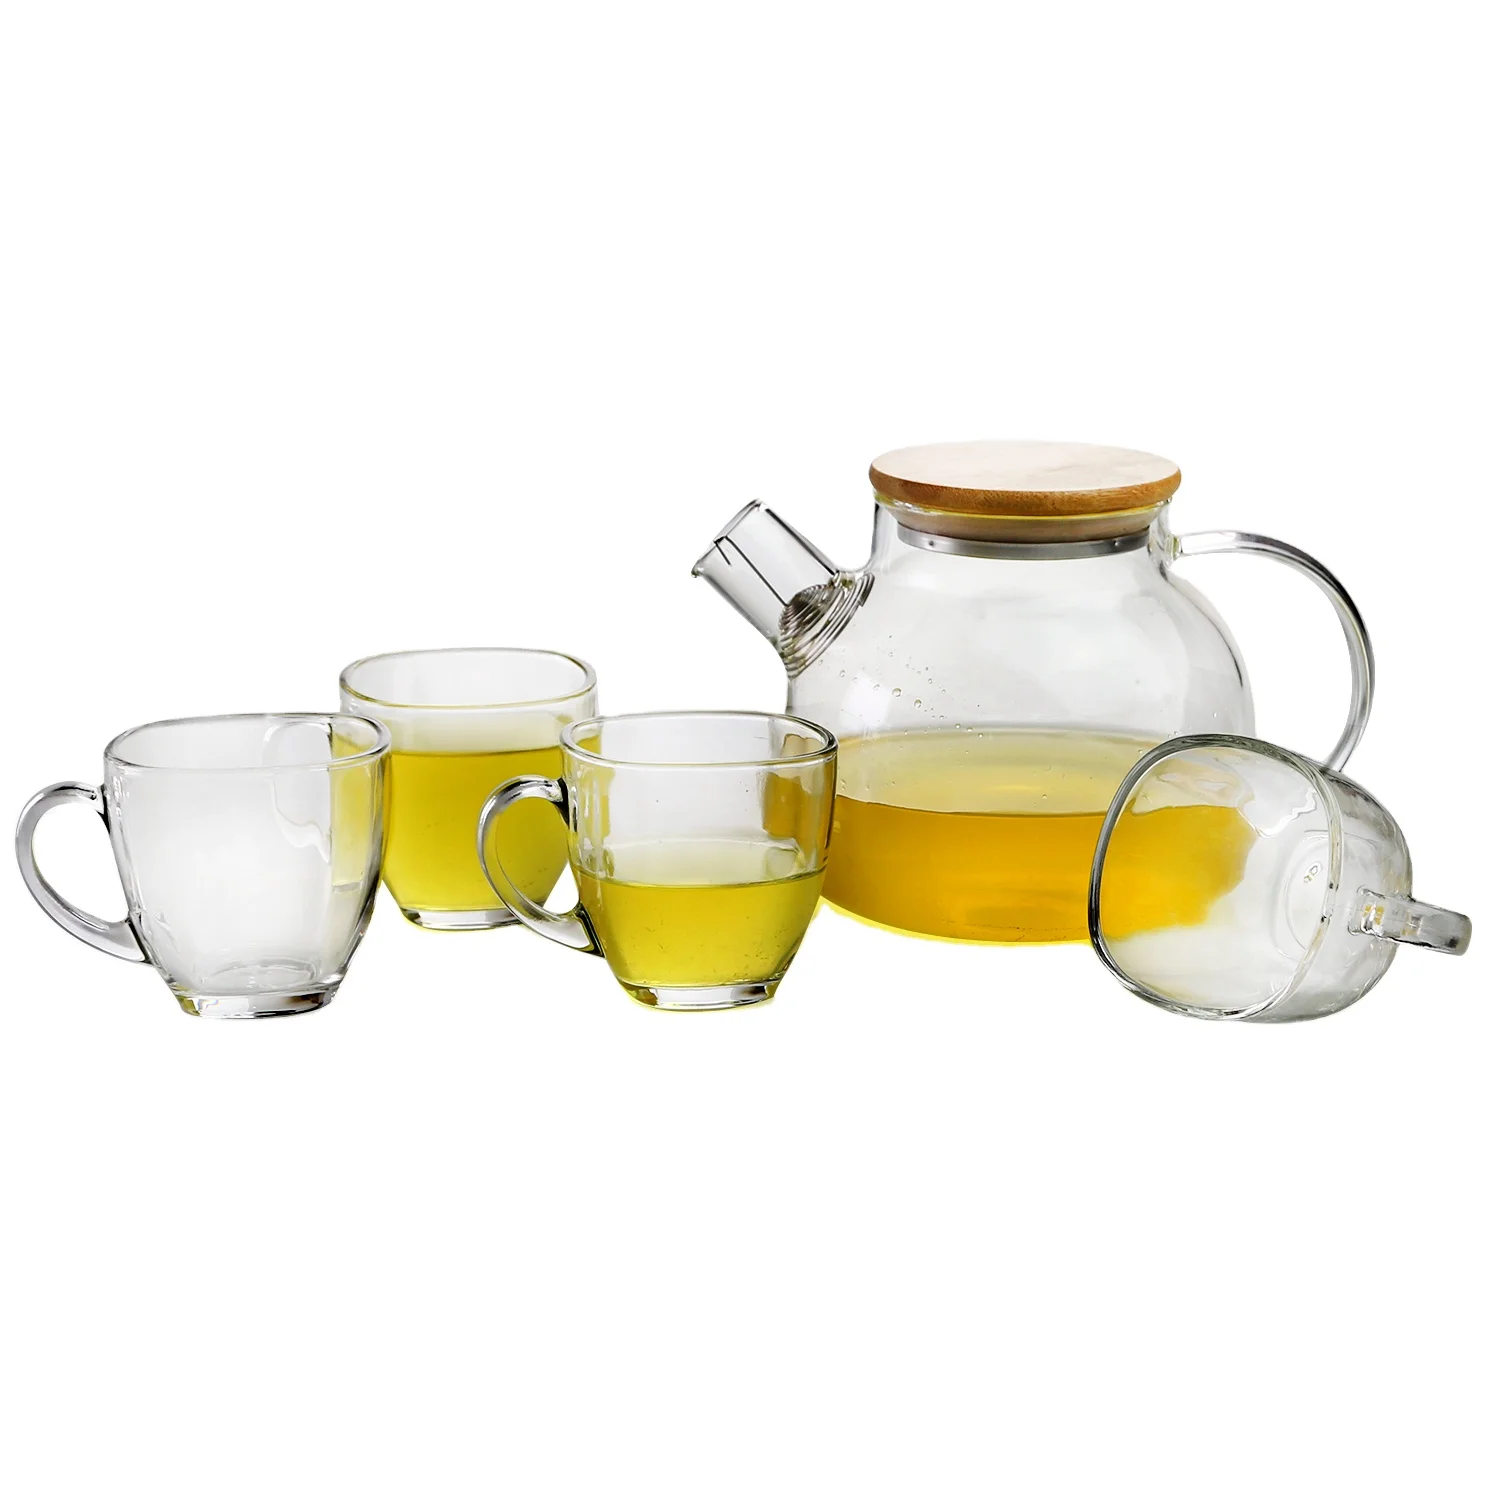 Drinking Pitcher Yeewin Brands Glass Water Jug 1L Home Transparent Water Jug Set With Have 4 Cup